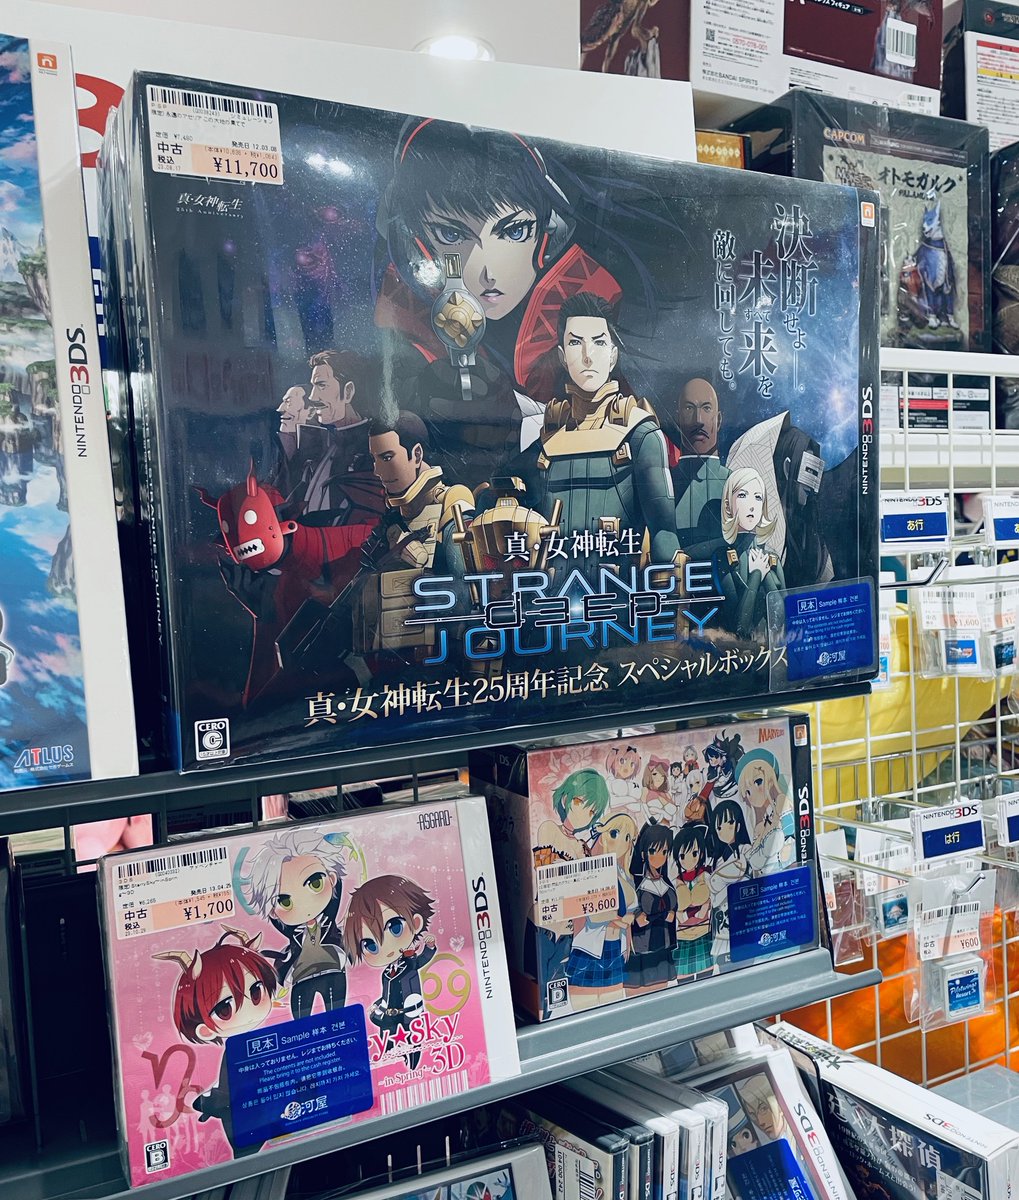 These Japanese special edition 3DS versions of Strange Journey, Shin Megami Tensei IV, and Radiant History looked amazing. I wish I had more space in my suitcase!